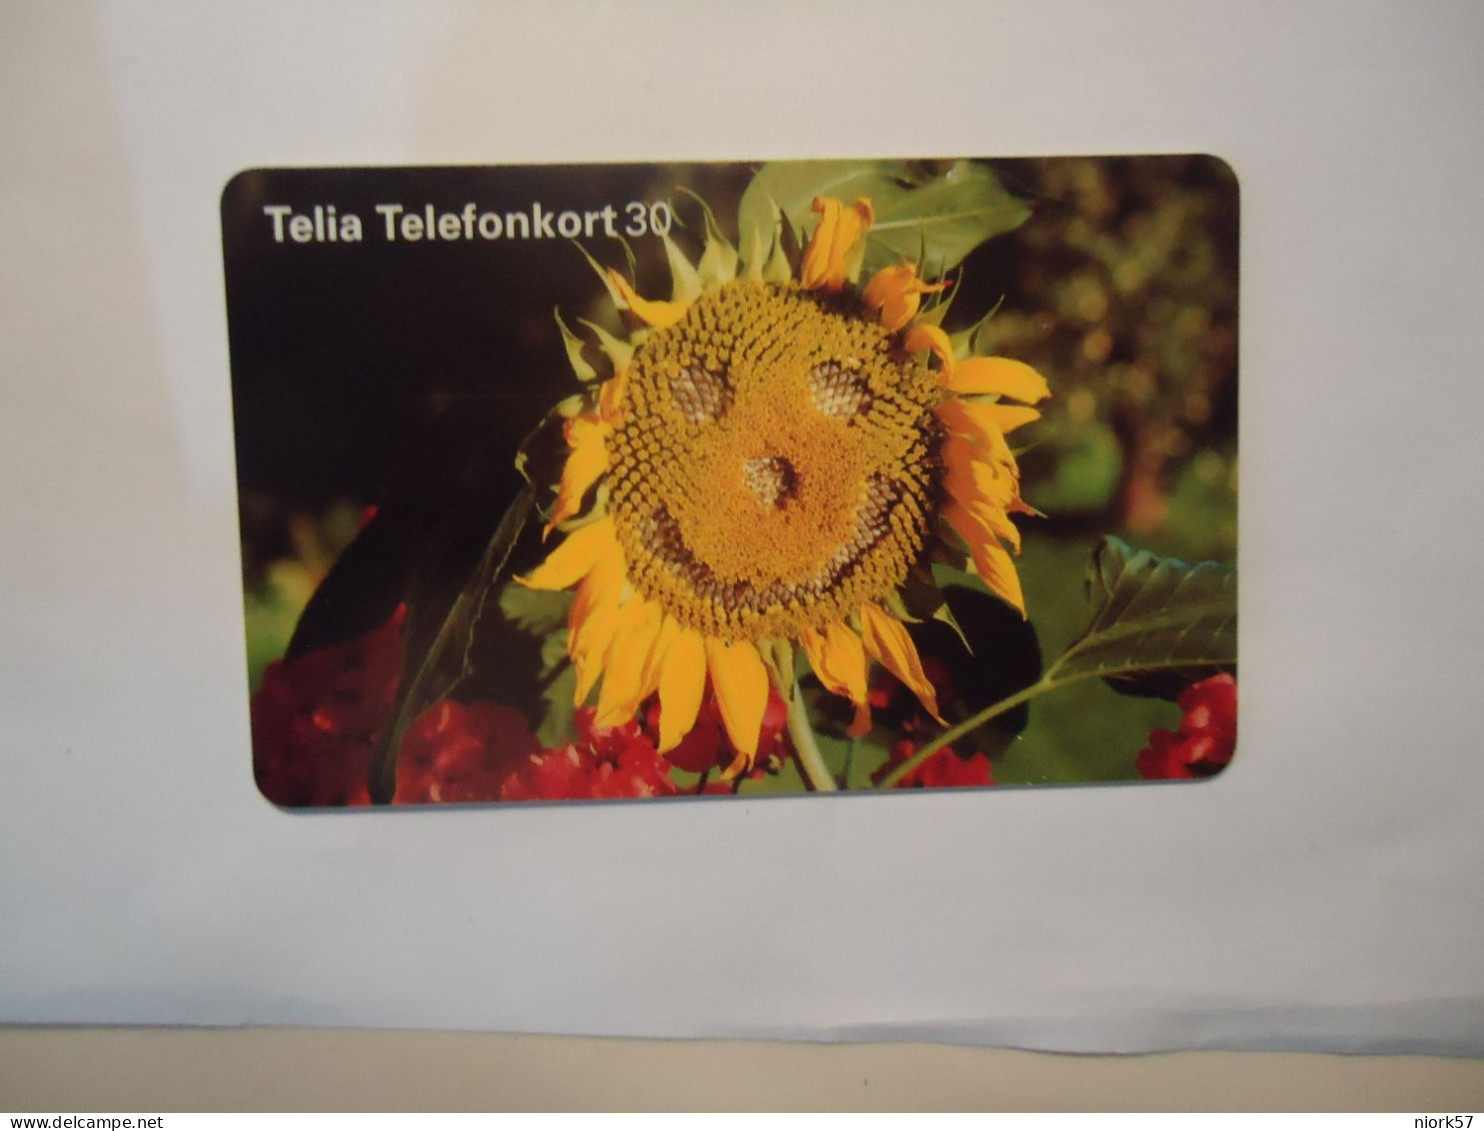 SWEDEN  USED  CARDS  FLOWERS PLANTS - Flores